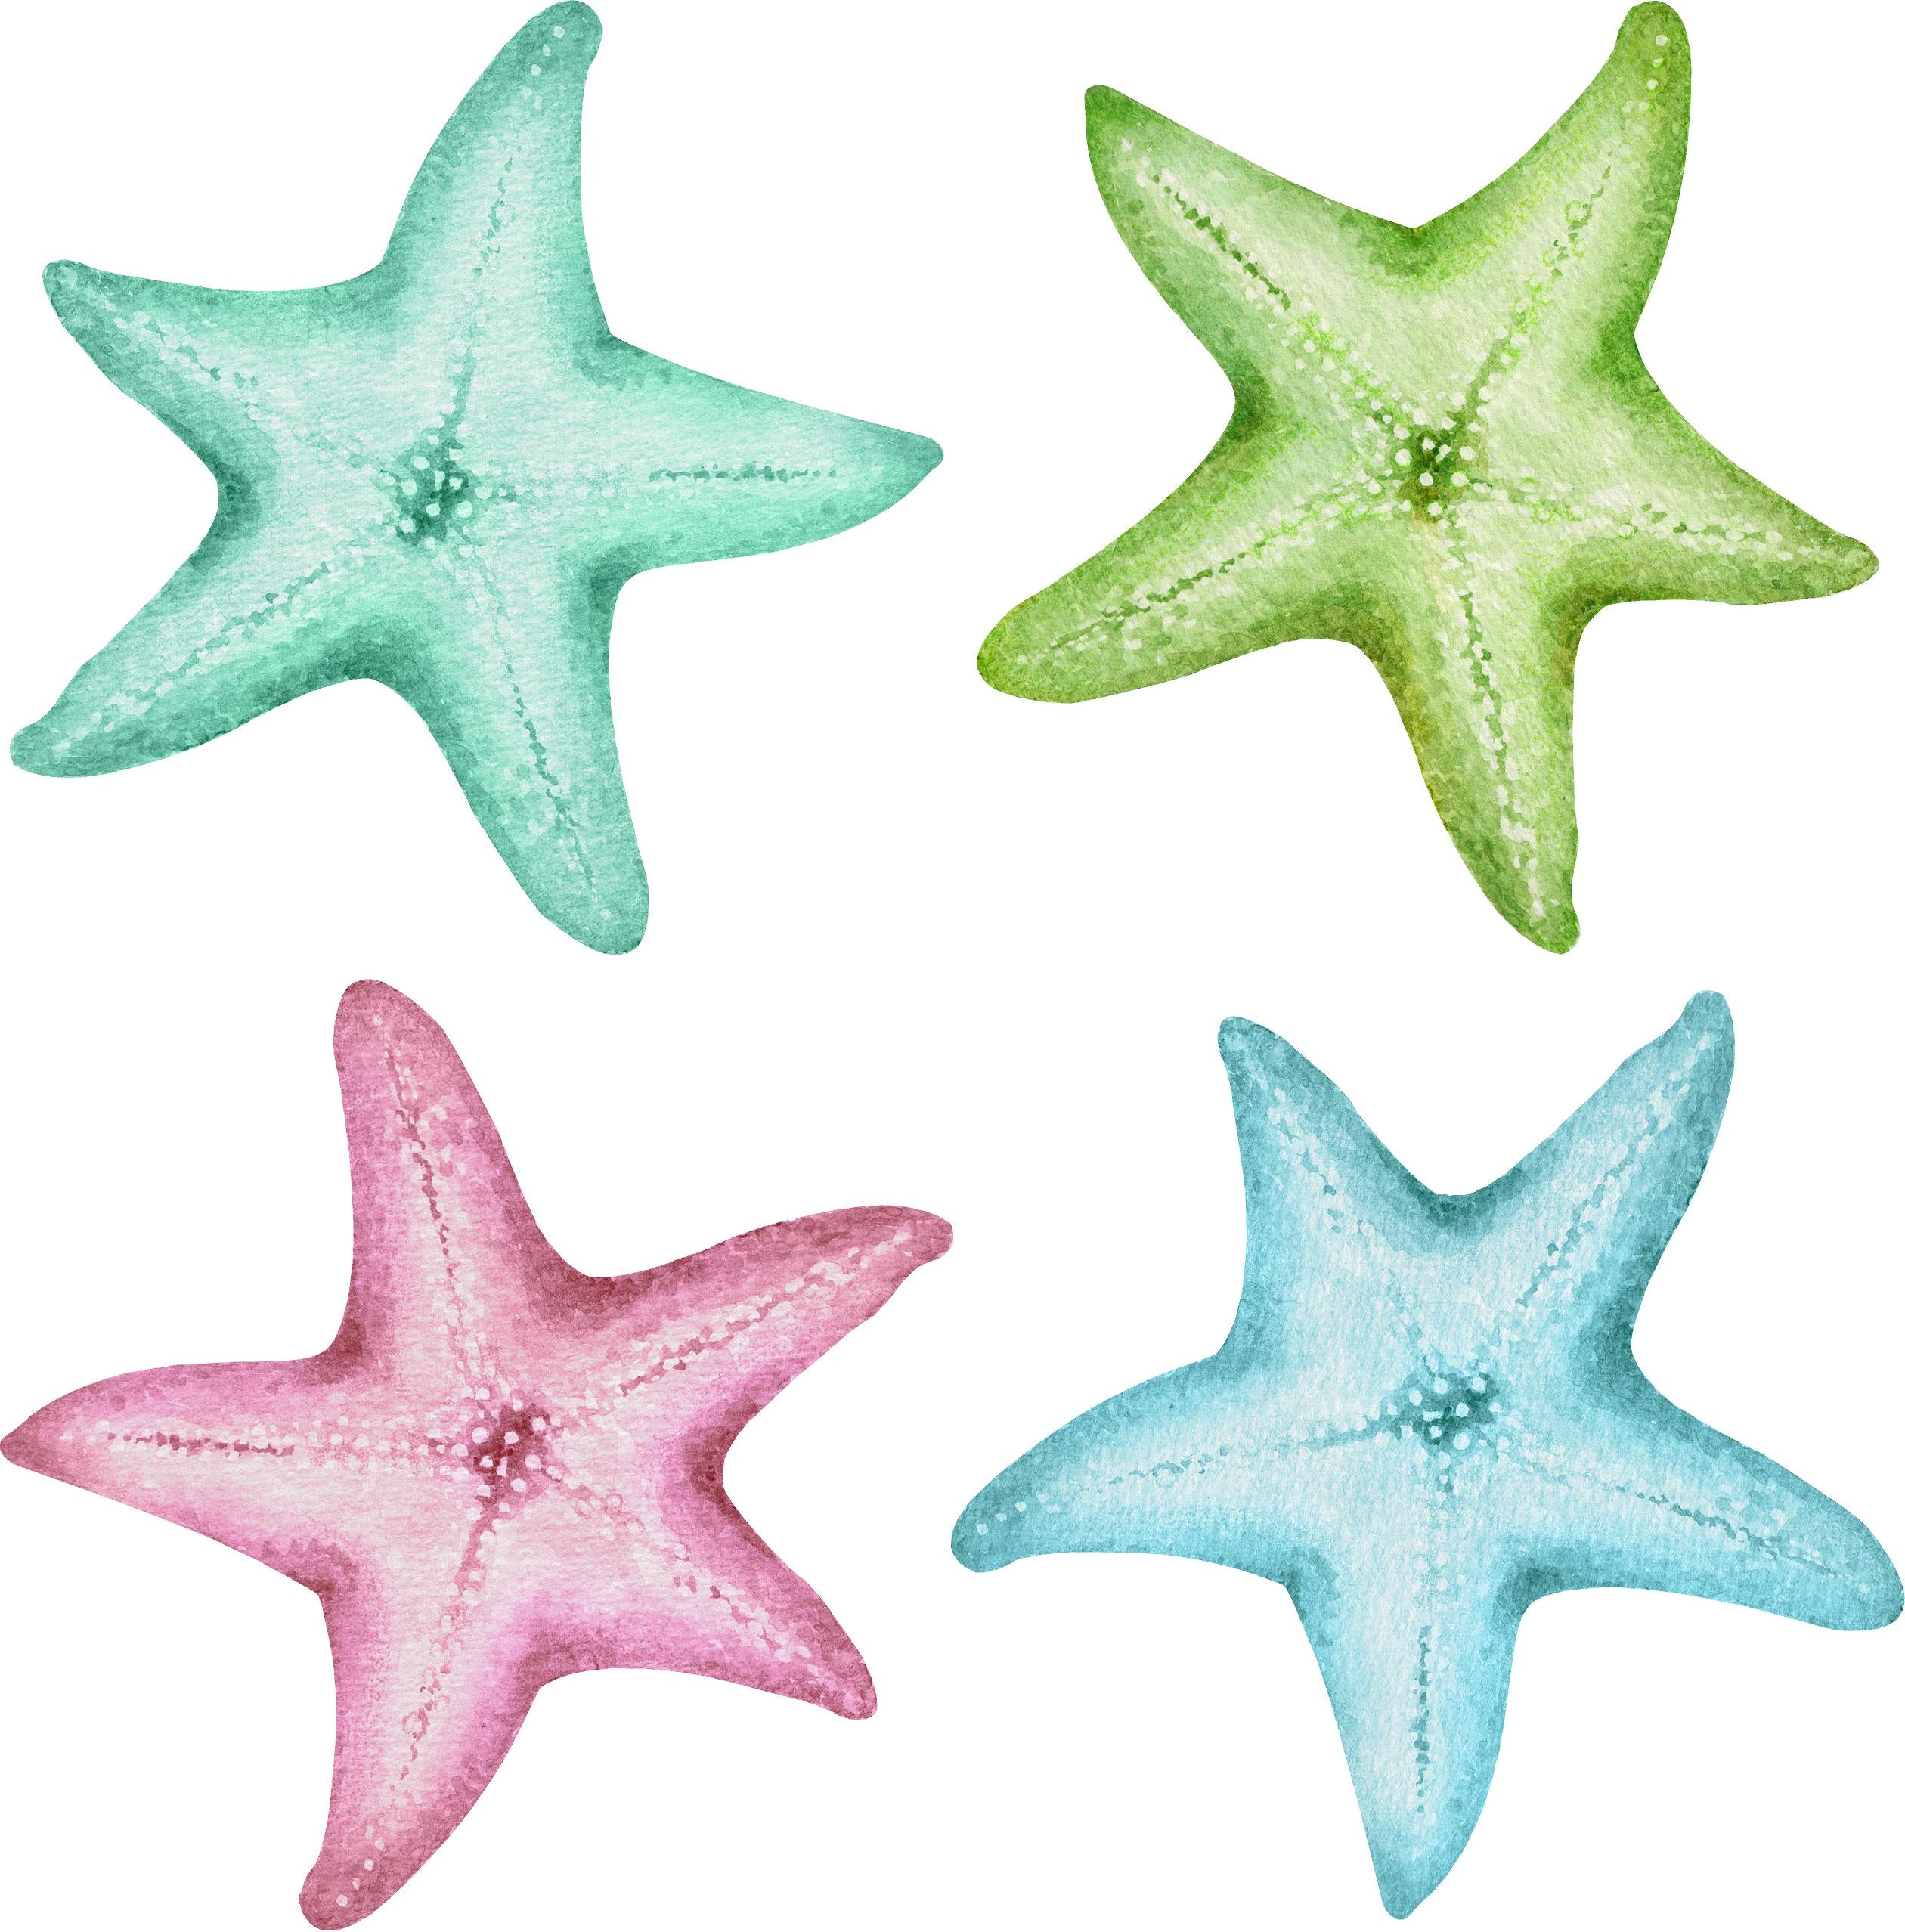 Watercolor Starfish Wall Decal Set of 4 Removable Pastel Sea Star Wall Sticker | DecalBaby